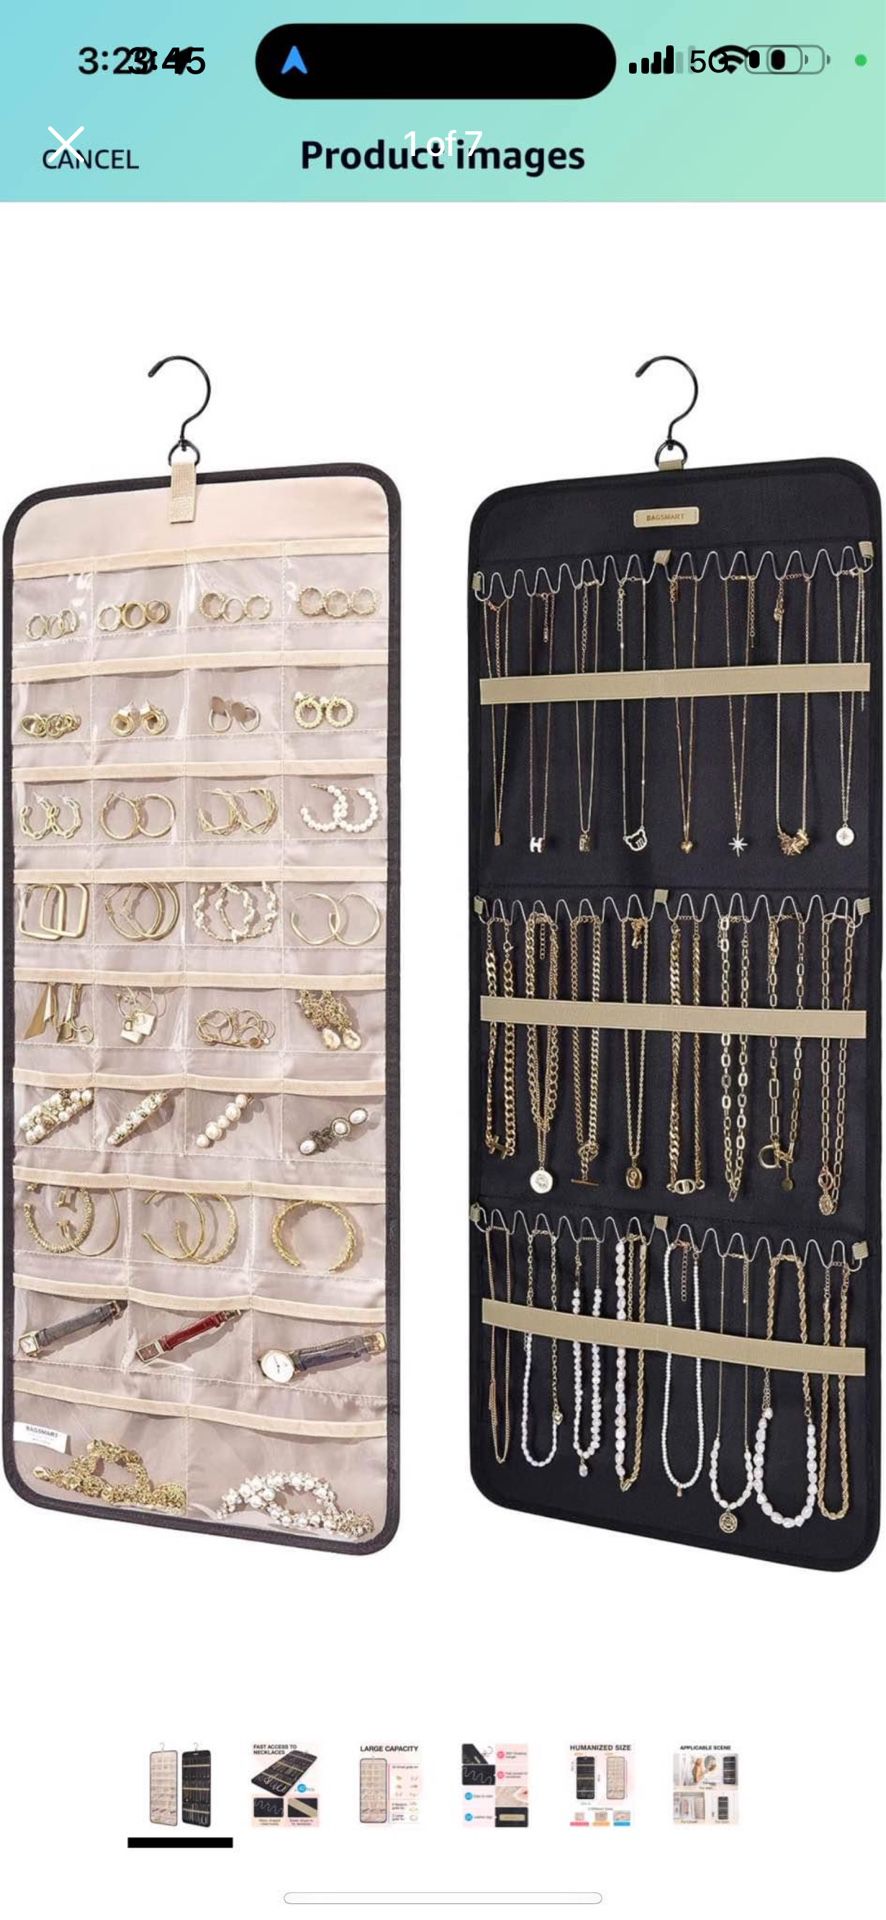 BAGSMART Hanging Jewelry Organizer Storage Roll with Hanger Metal Hooks Double-Sided Jewelry Holder for Earrings, Necklaces, Rings on Closet, Wall, Do